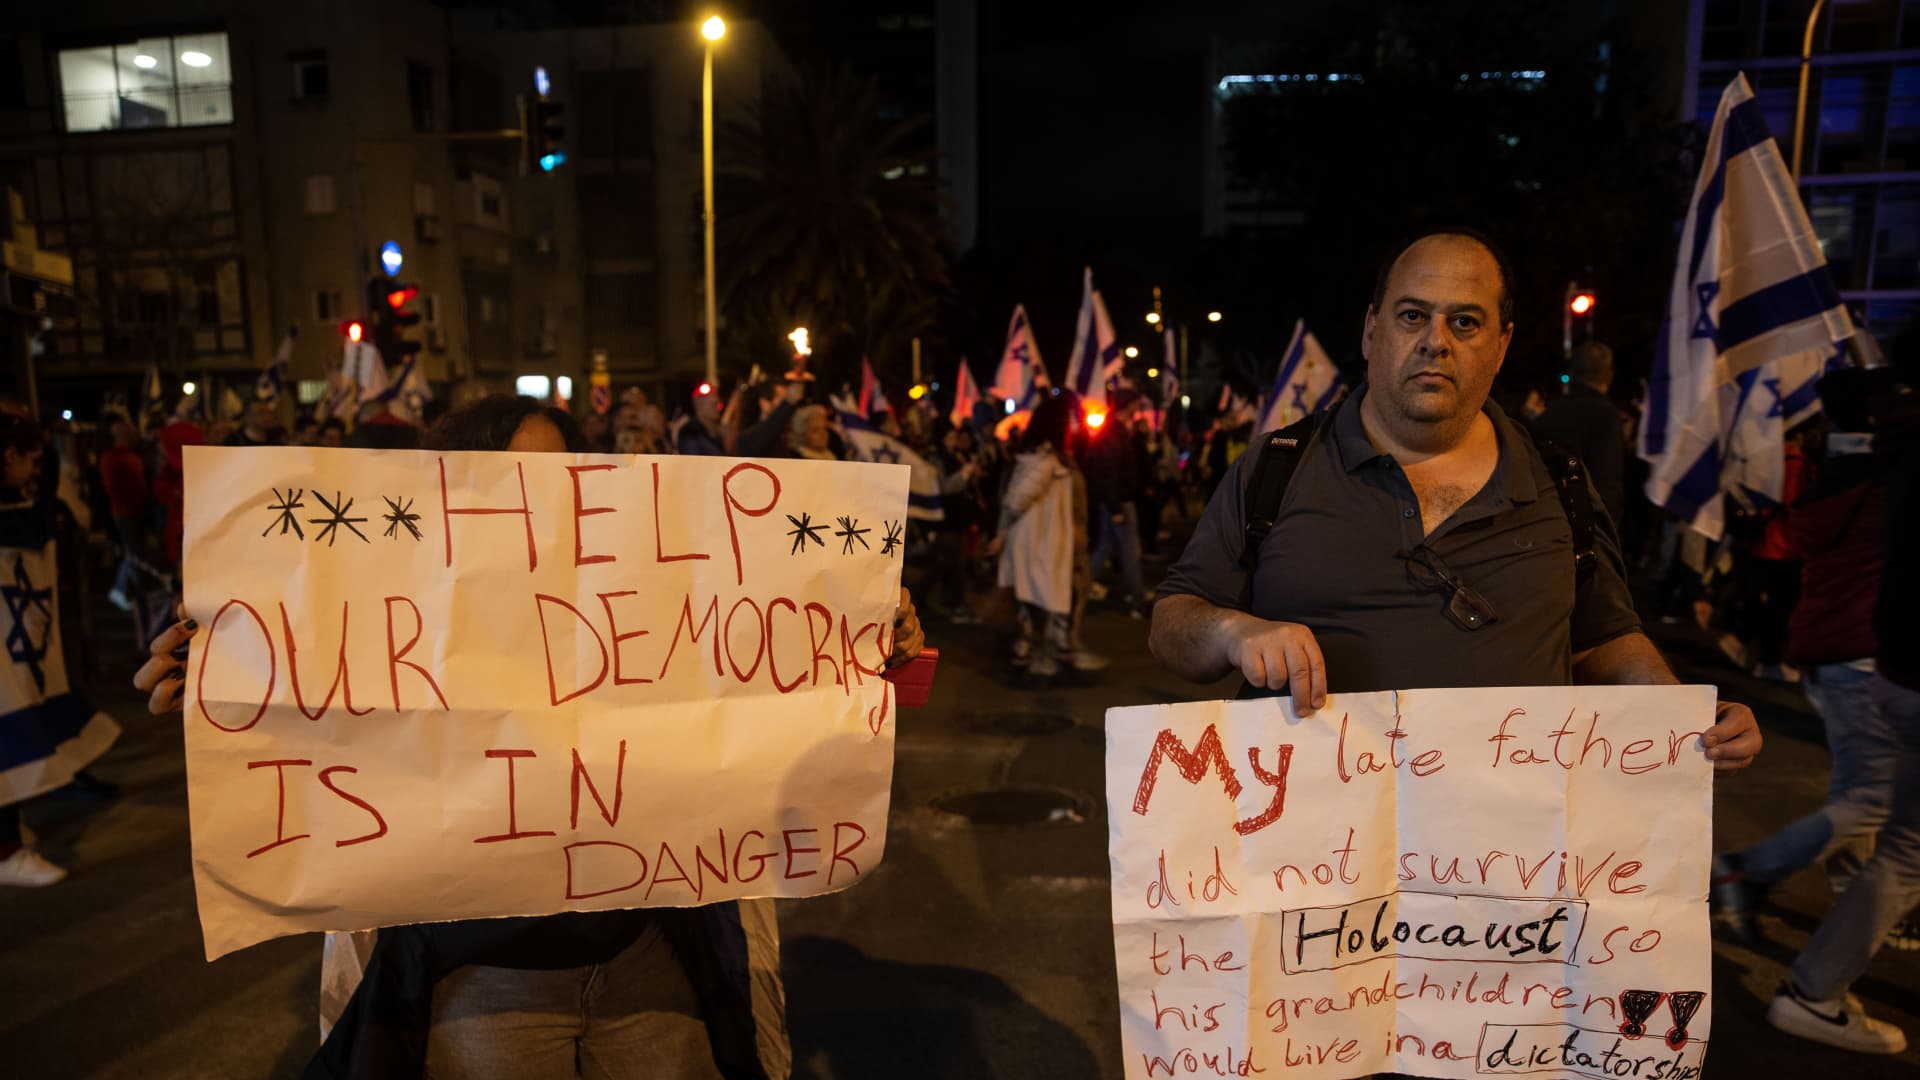 People stage protest against Israeli Prime Minister Benjamin Netanyahu's bill that restricts the powers of the judiciary and his right-wing policies at the Dizengoff Square in Tel Aviv, Israel on February 25, 2023.